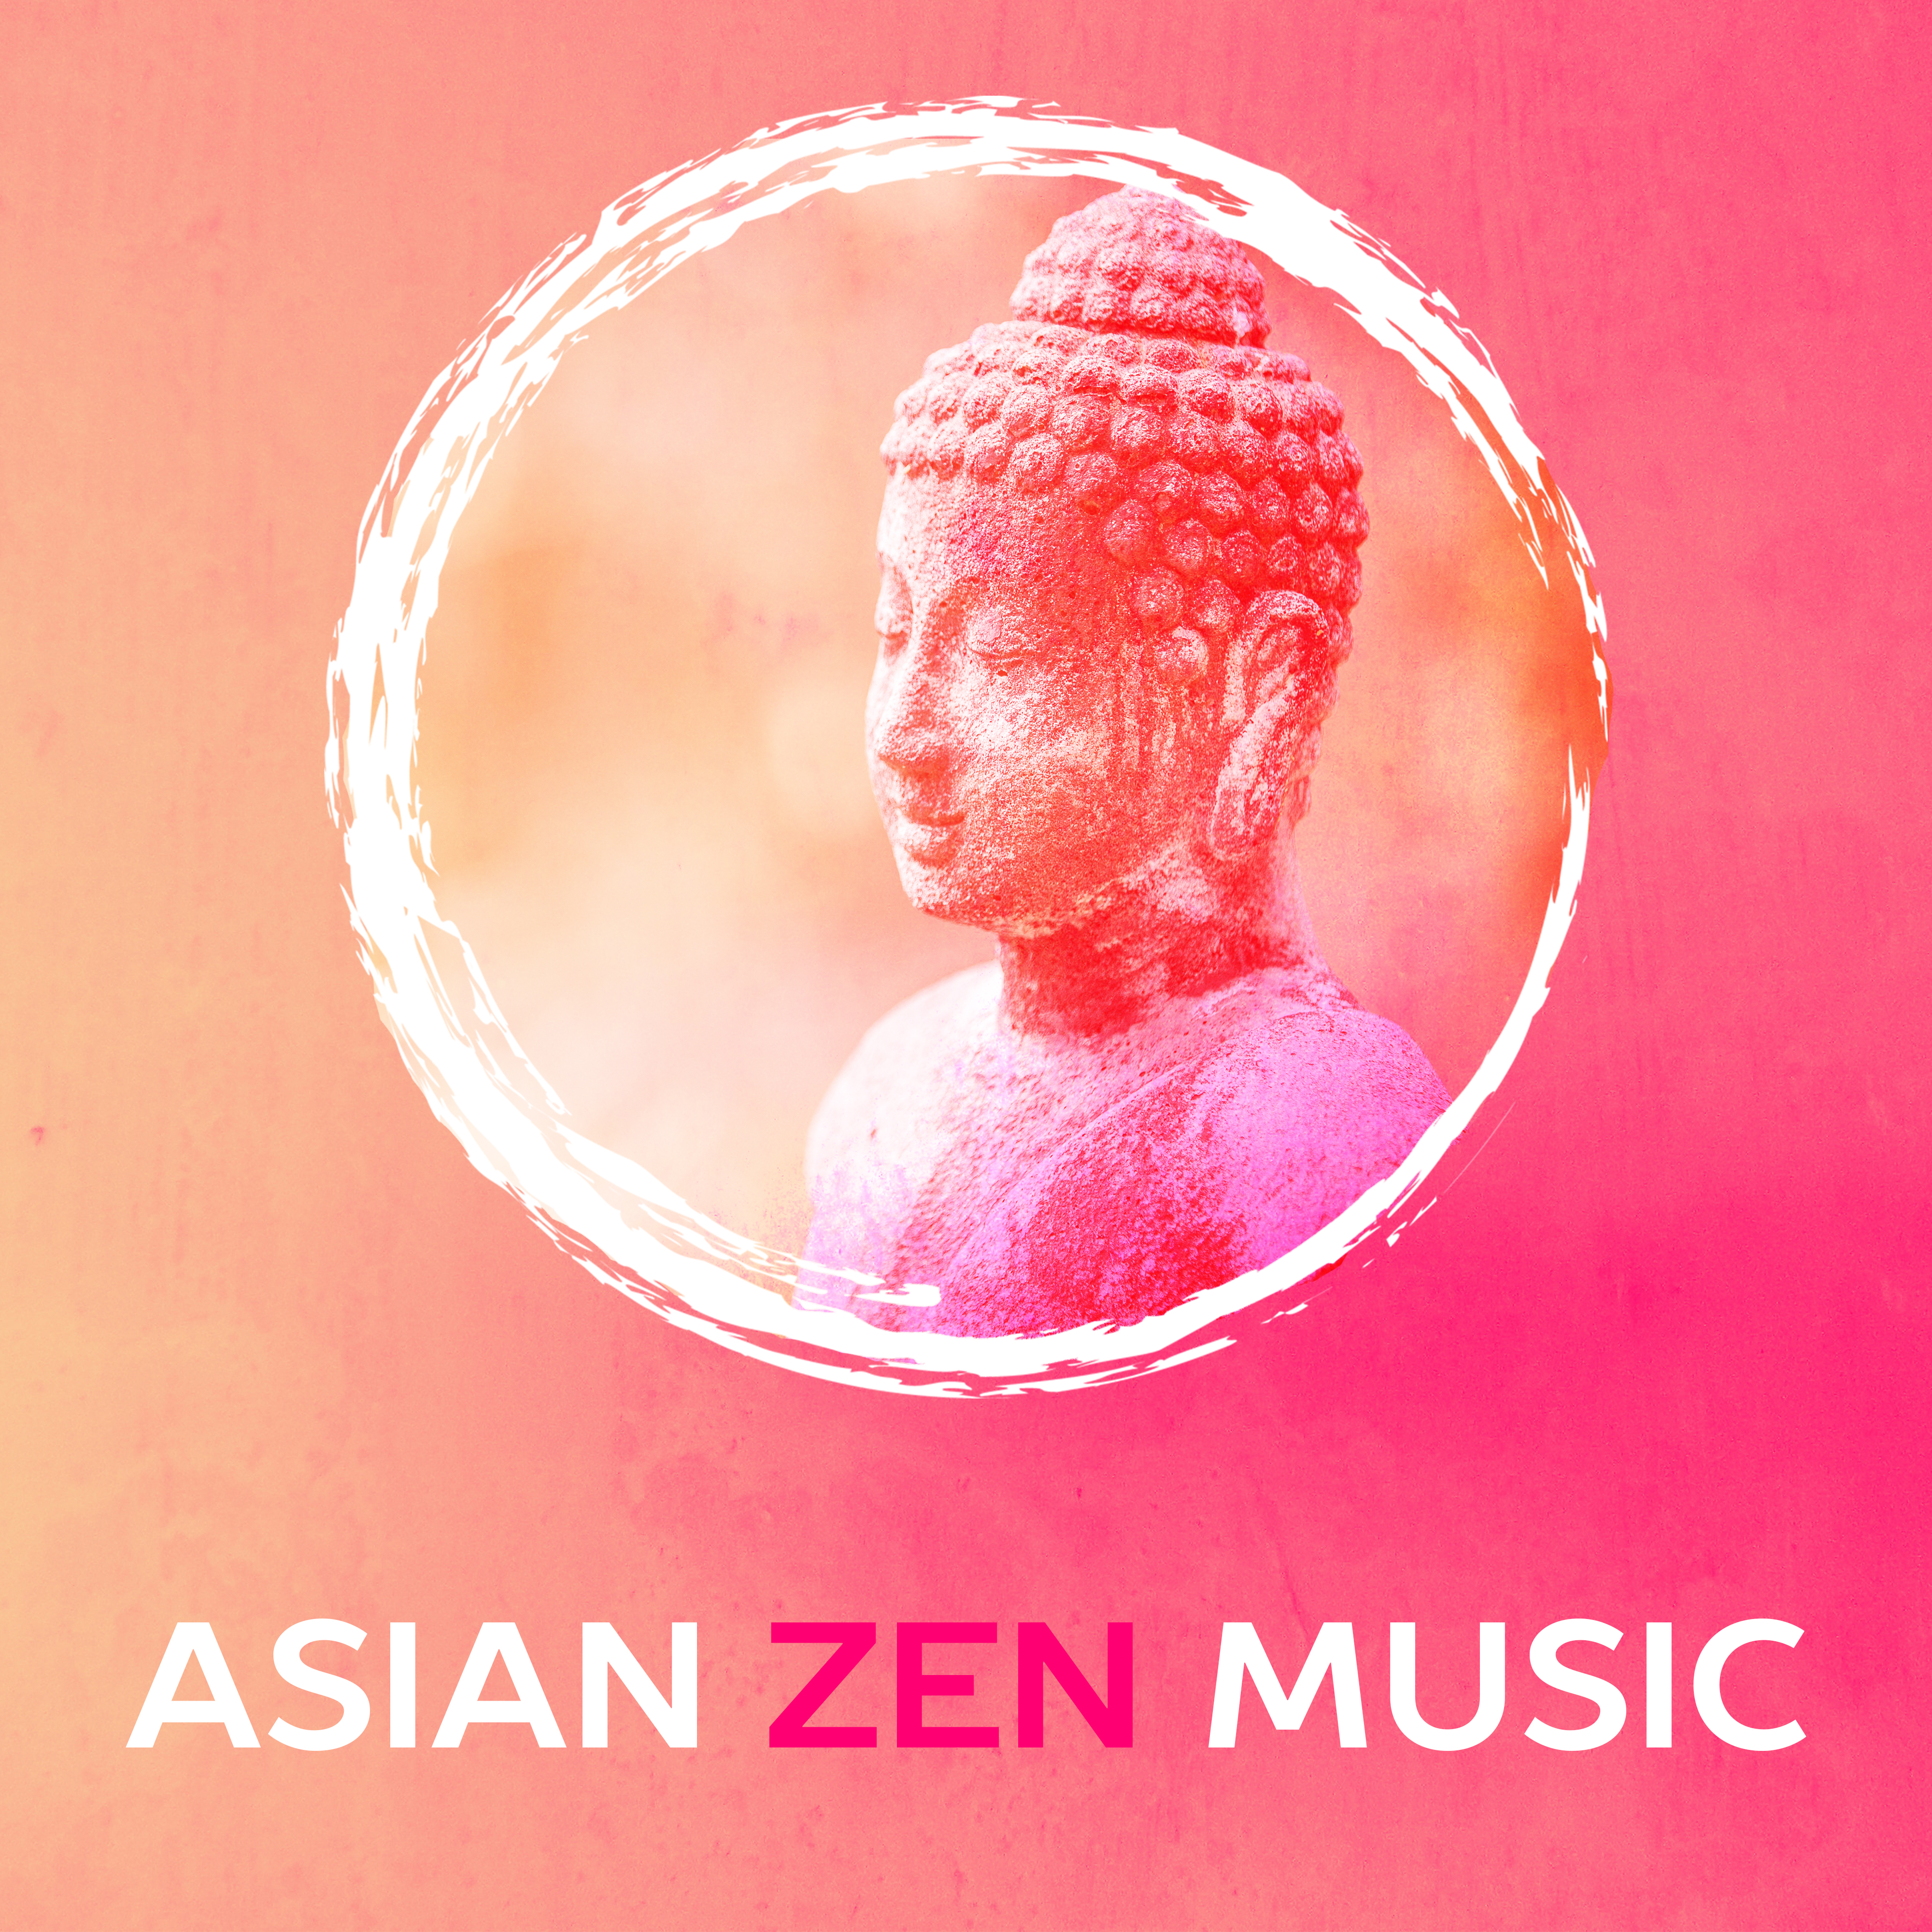 Asian Zen Music – Soft Music to Meditate in Peace, New Age Relaxation for Spirit, Chilled Sounds for Inner Calmness